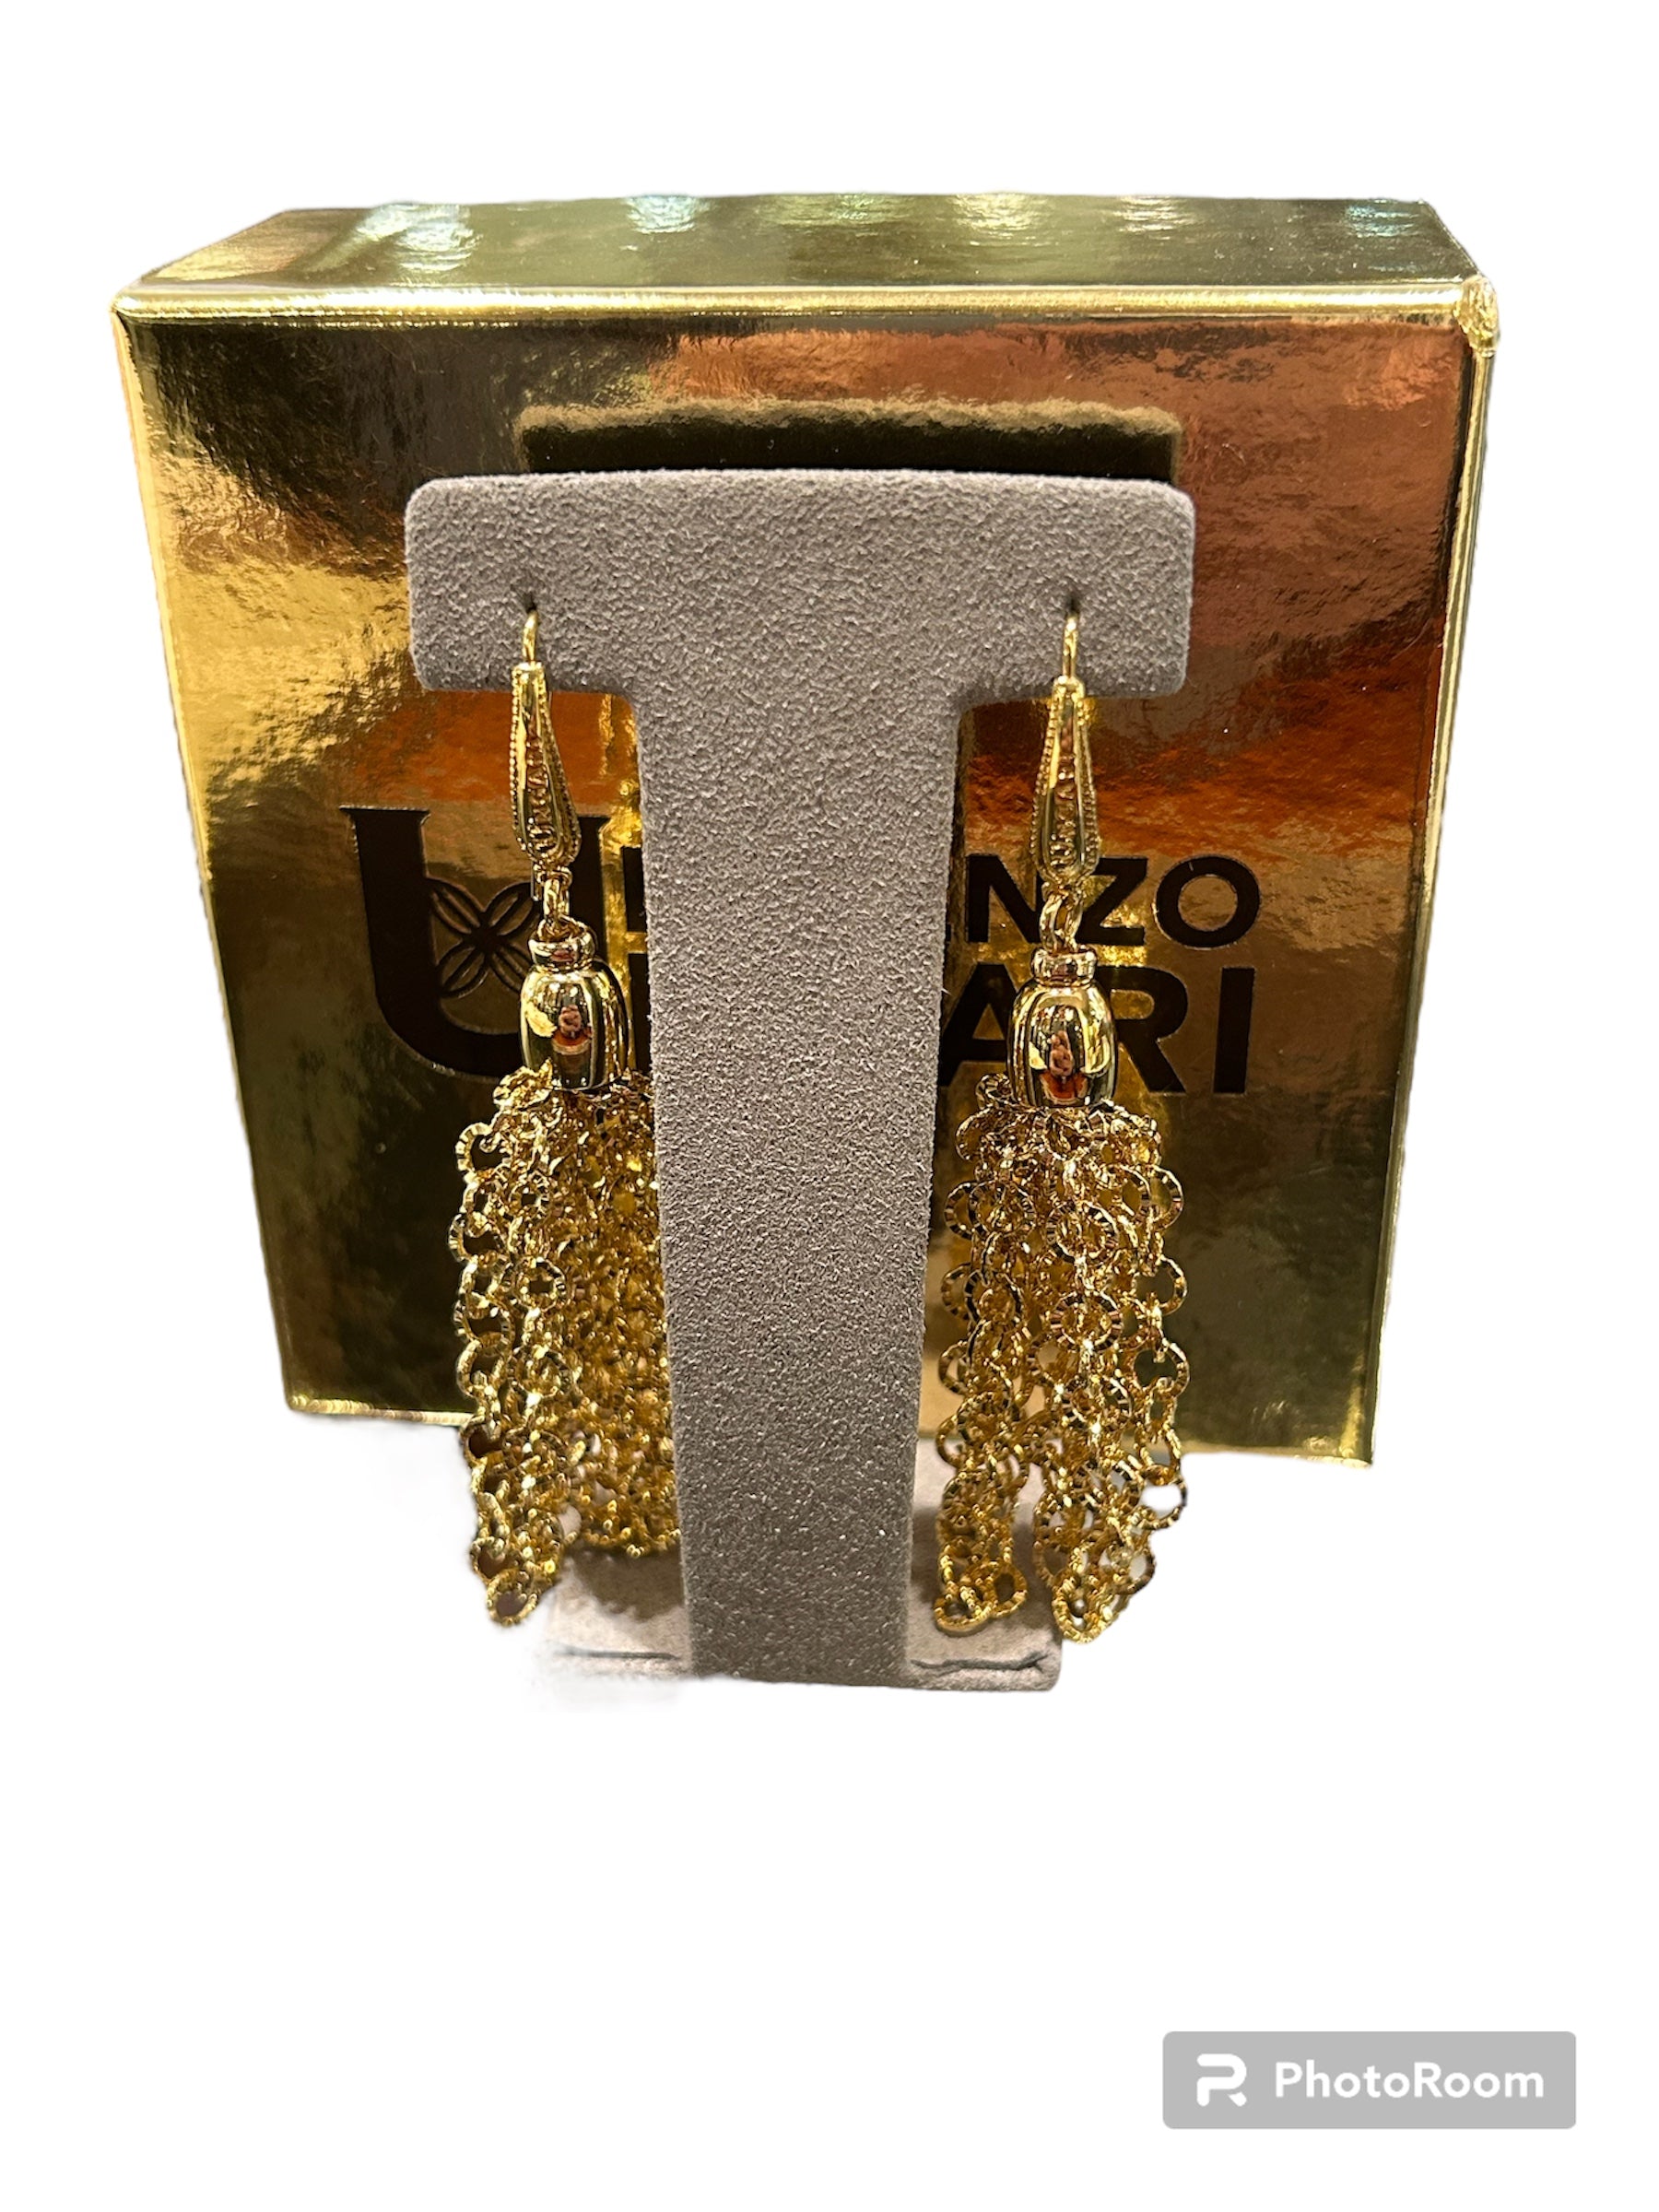 Dangle earrings with rolò-type multi-strand links in gilded bronze - USA OR 021